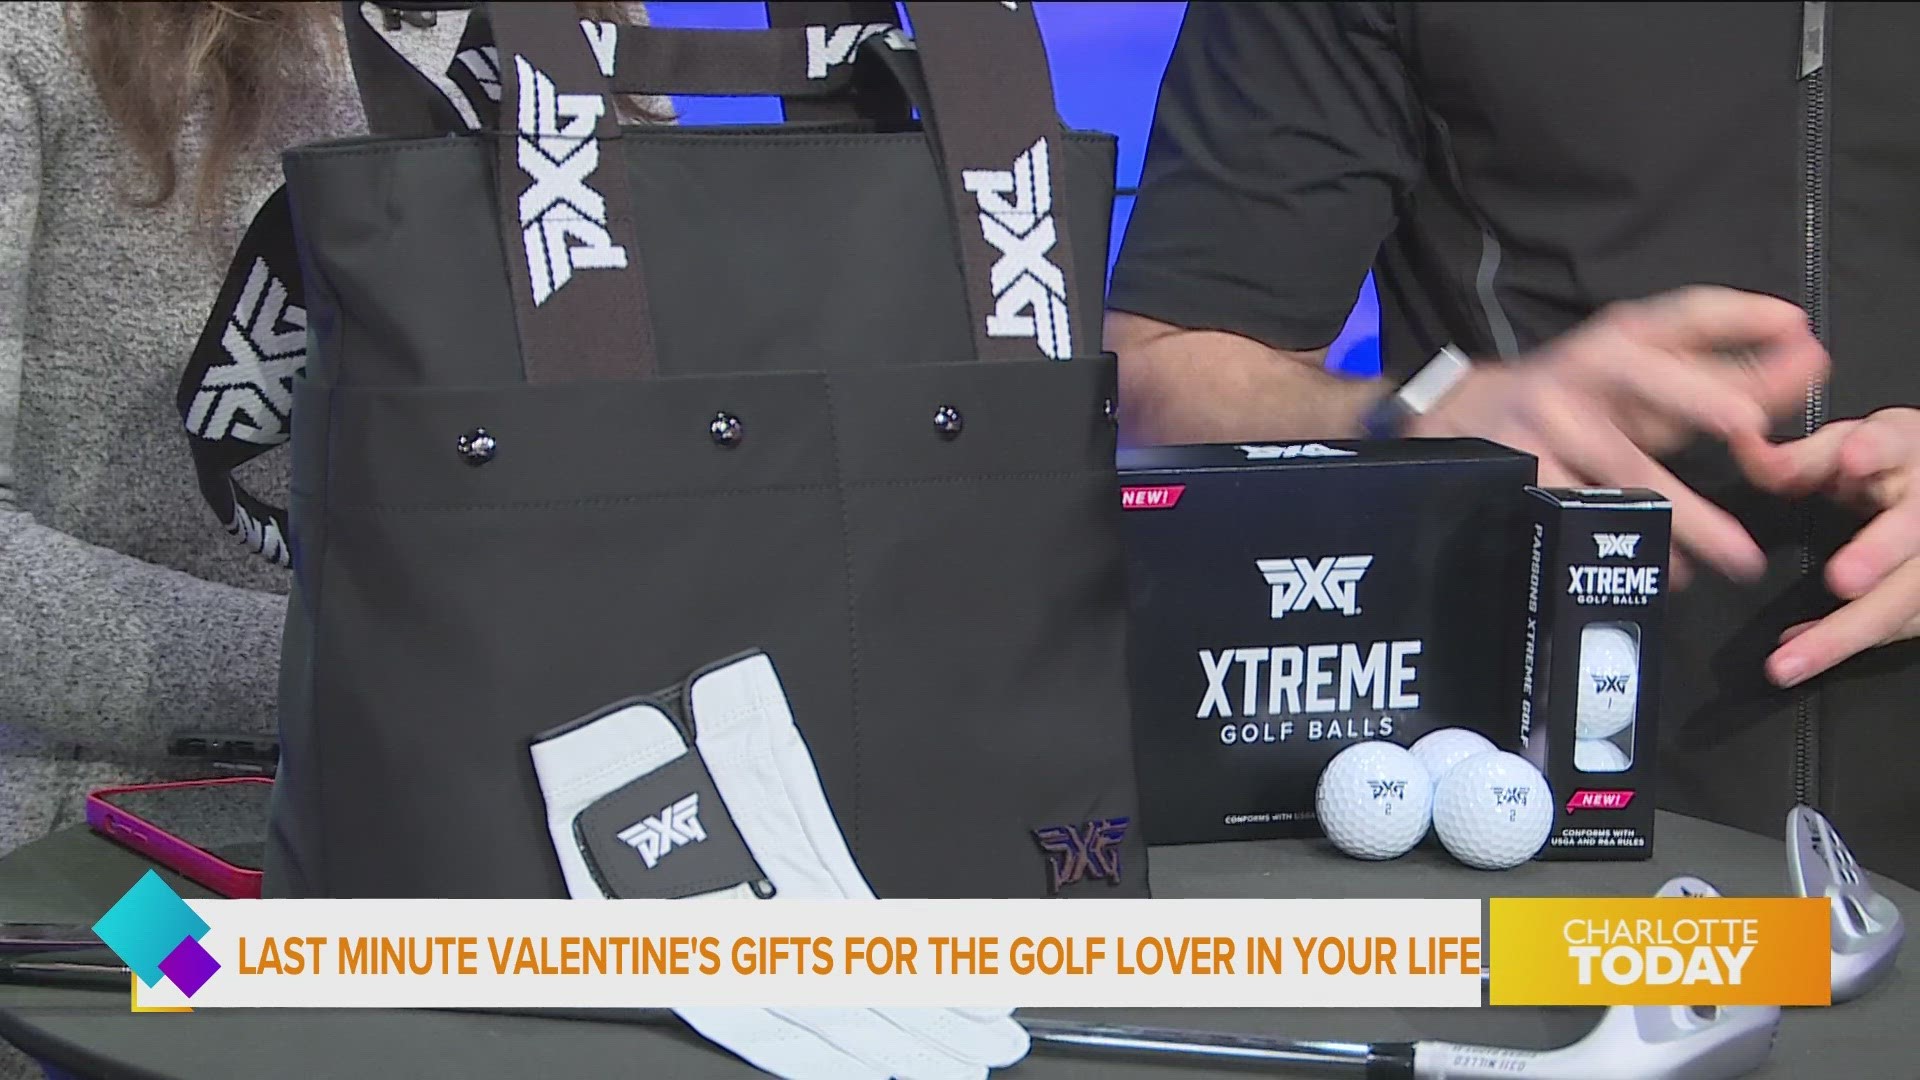 PXG has apparel, accessories and more to gift your sweetie